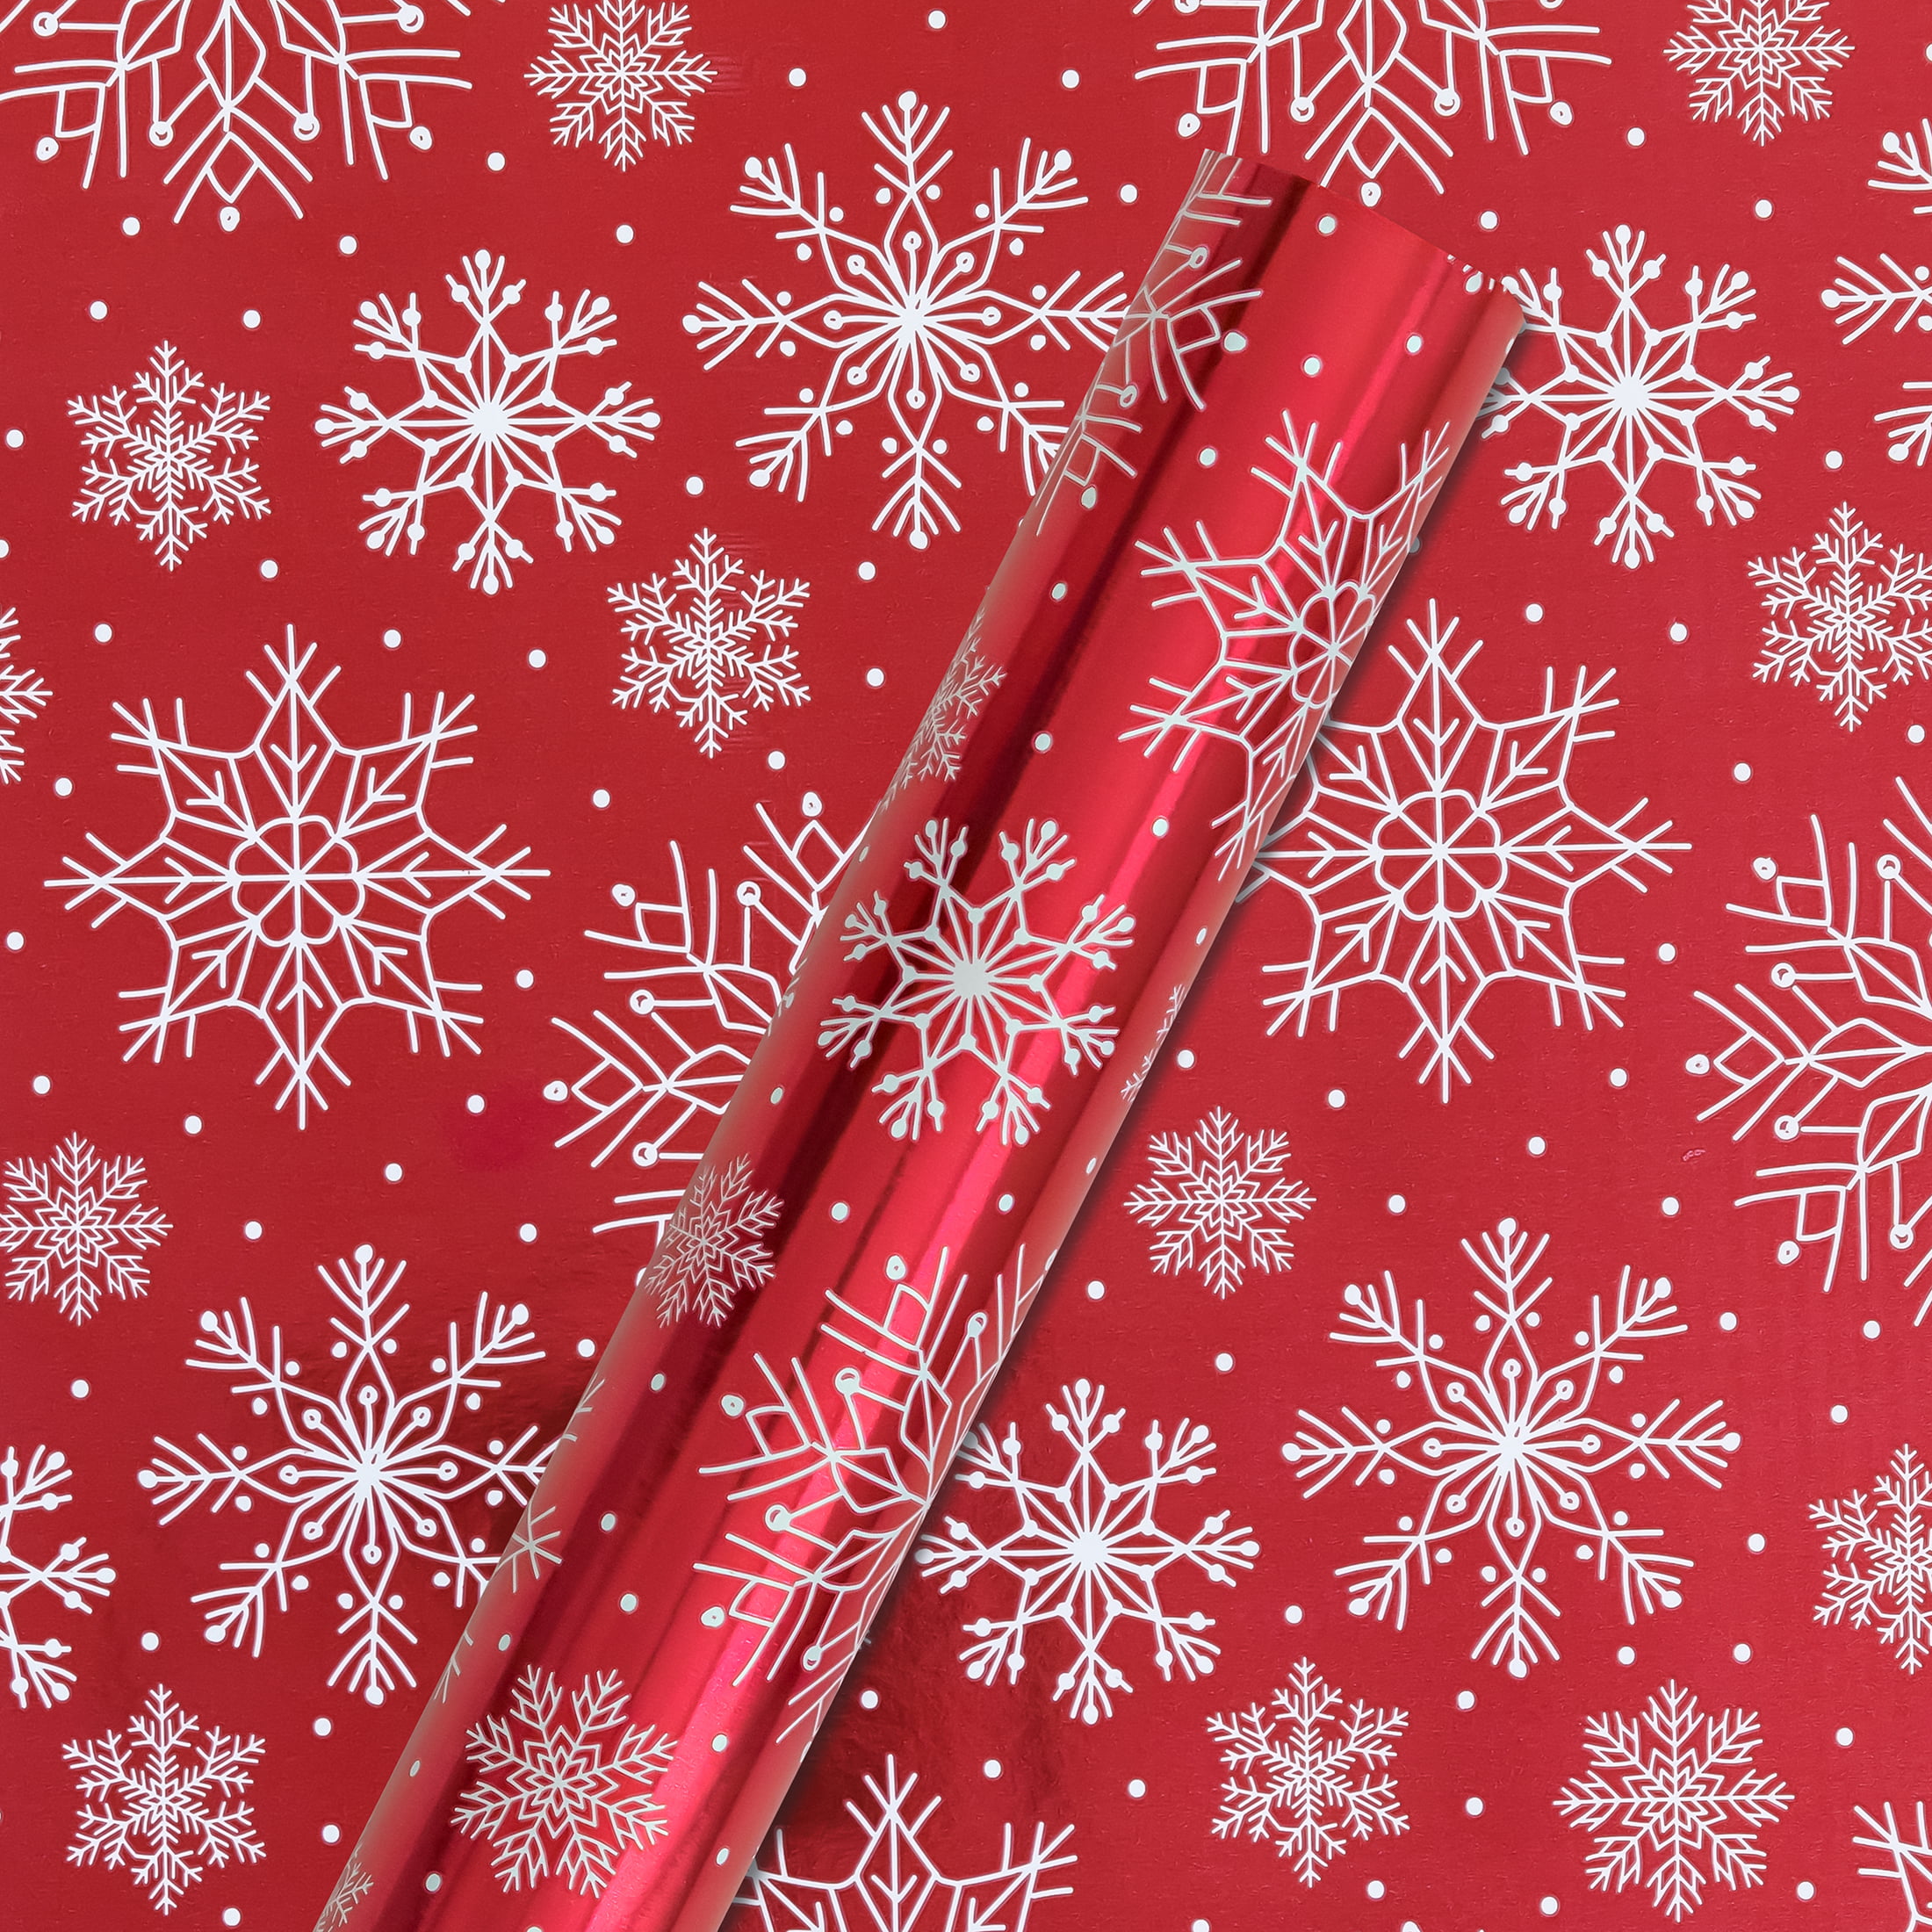 Christmas ~ RED Snowflakes on White Tissue Paper #405 ~ 10 Large Sheets